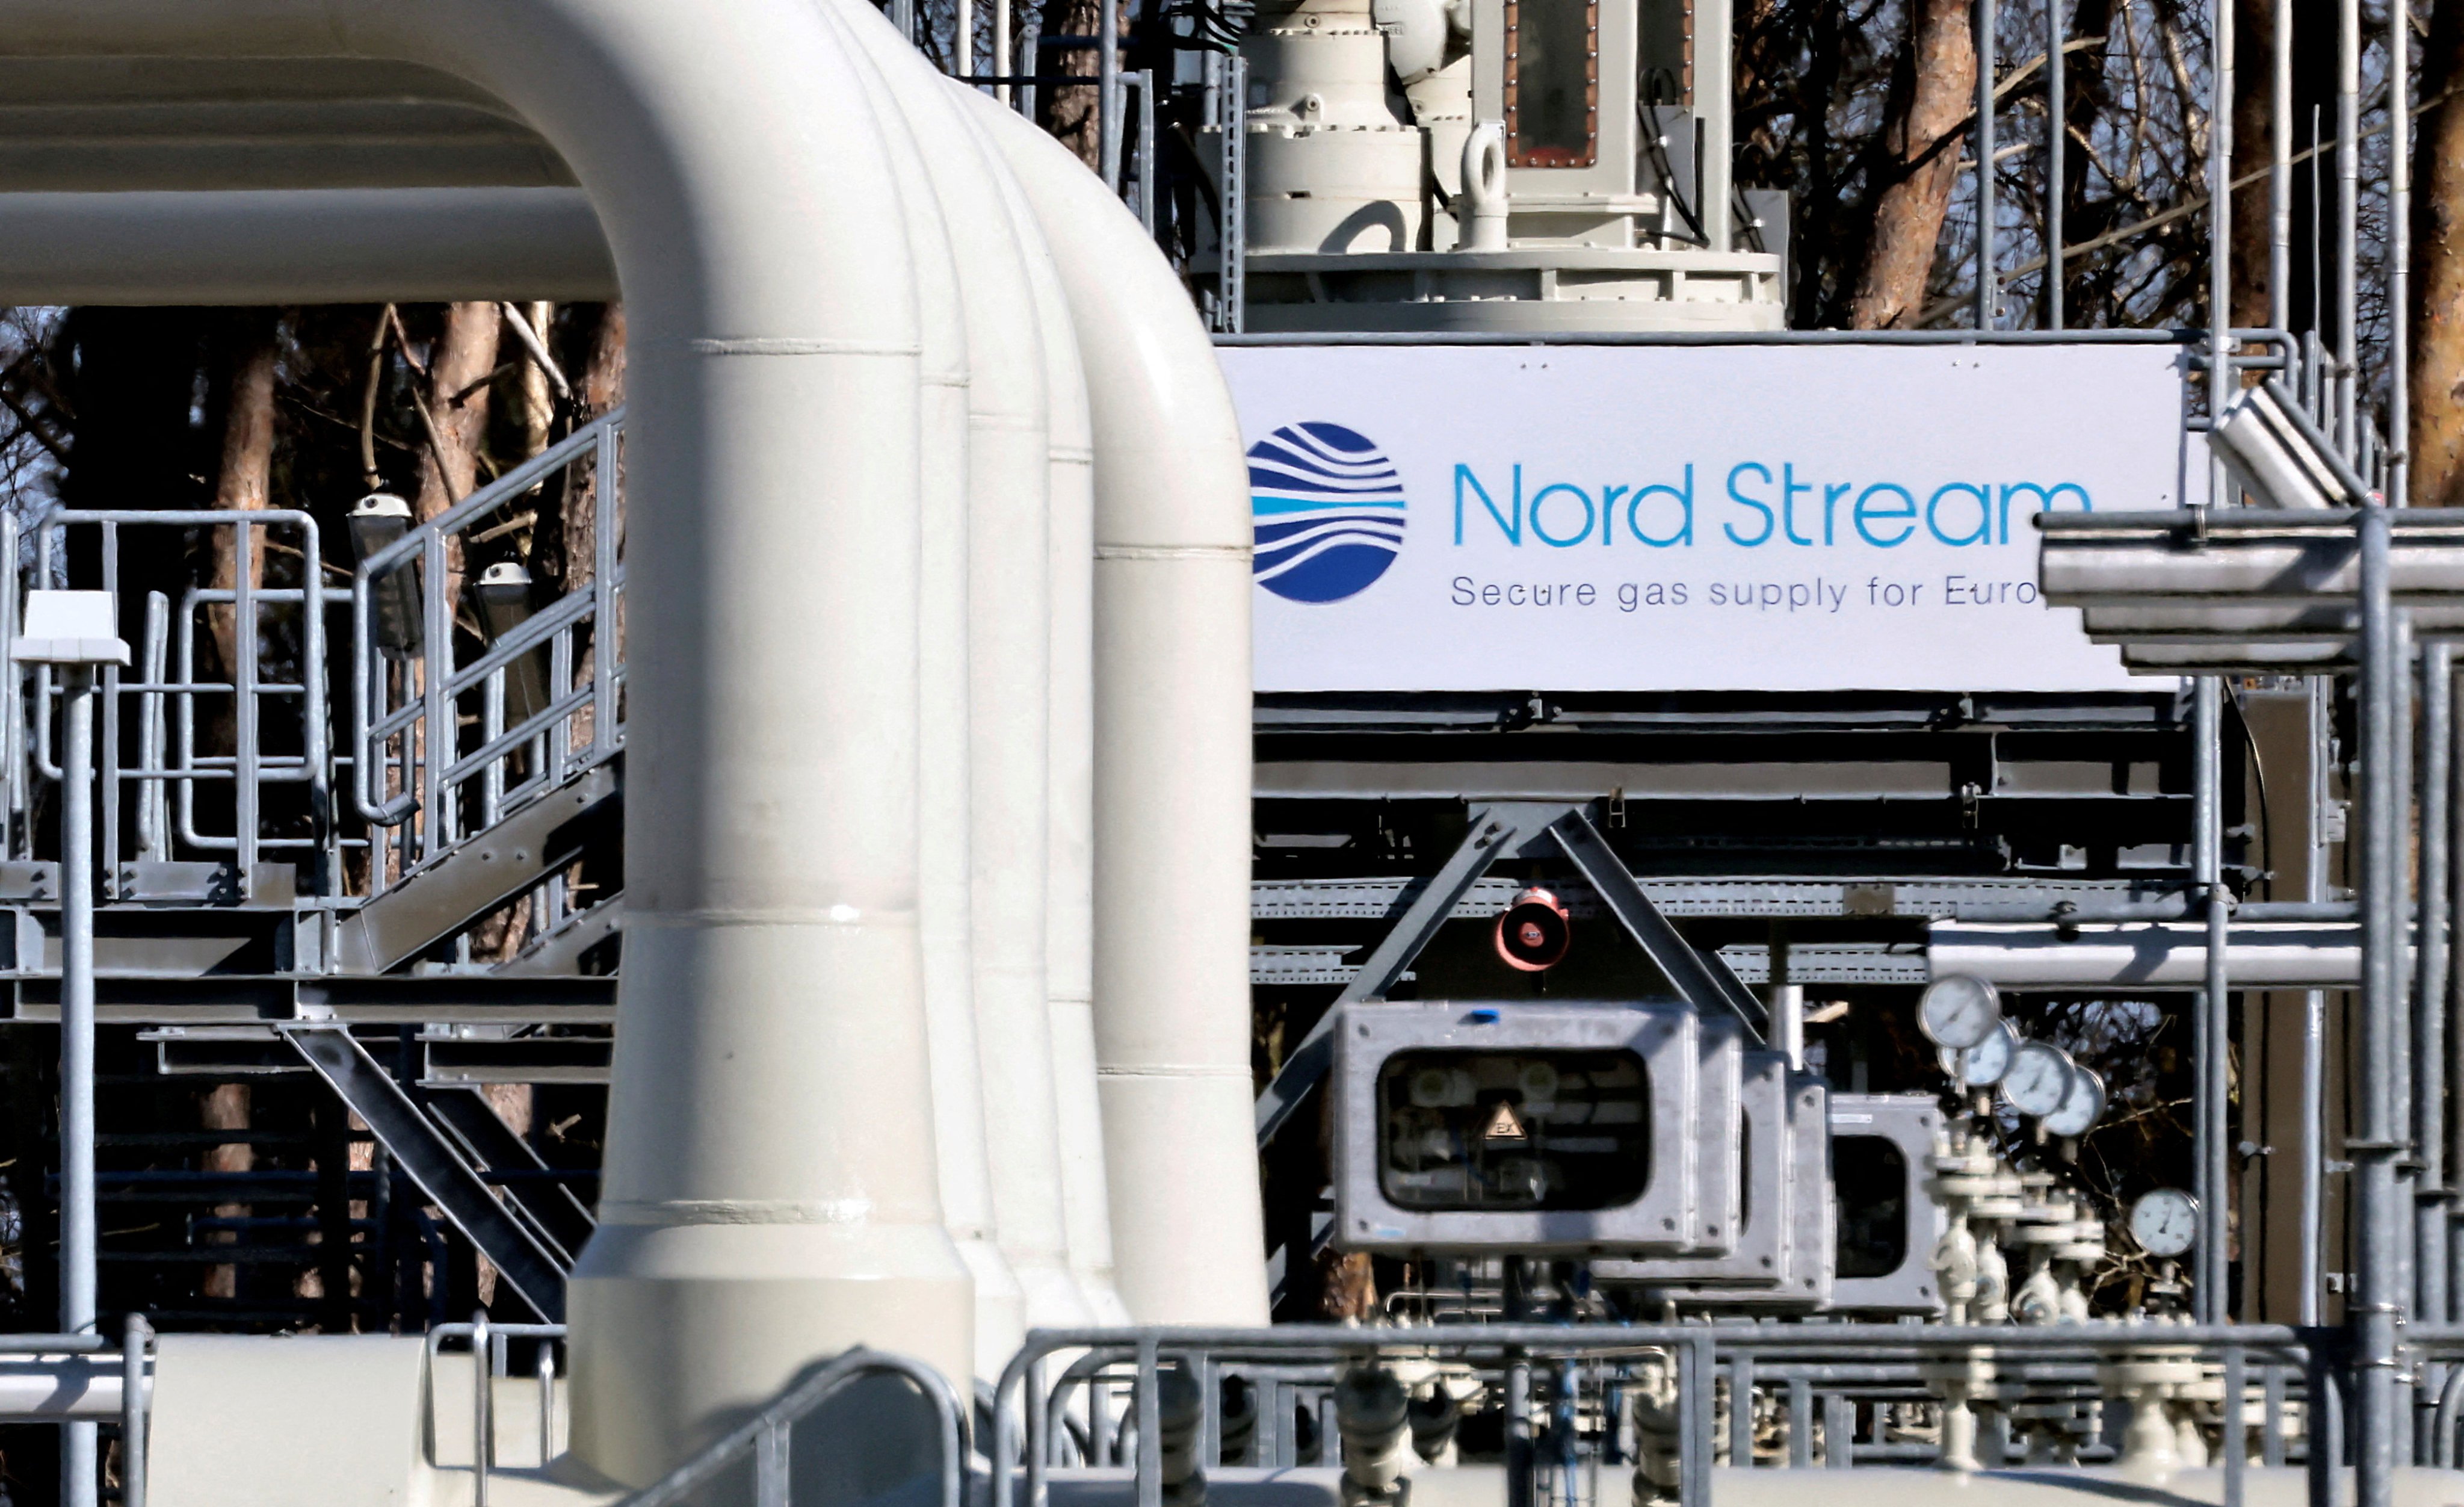 Pipes at the landfall facilities of the Nord Stream 1 gas pipeline in Lubmin, Germany. Photo: Reuters